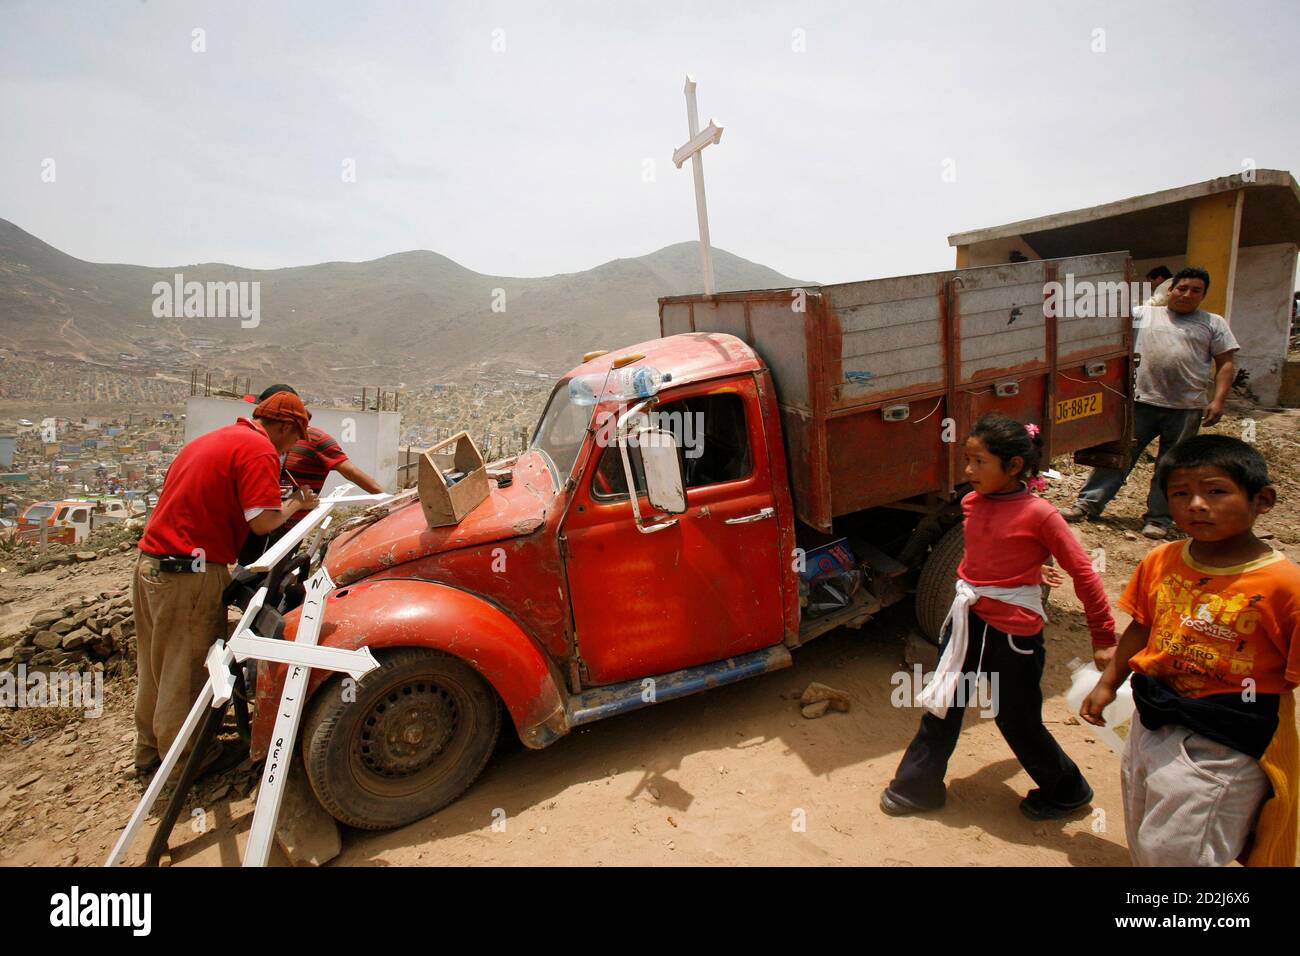 A man writes the names of the dead on crosses for a fee near a truck during 'Day of the Dead' celebrations in Nueva Esperanza cemetery on the outskirts of Lima November 1, 2009. Every year thousands of people visit cemeteries in Peru to honour their dead.  REUTERS/Mariana Bazo  (PERU SOCIETY) Stock Photo